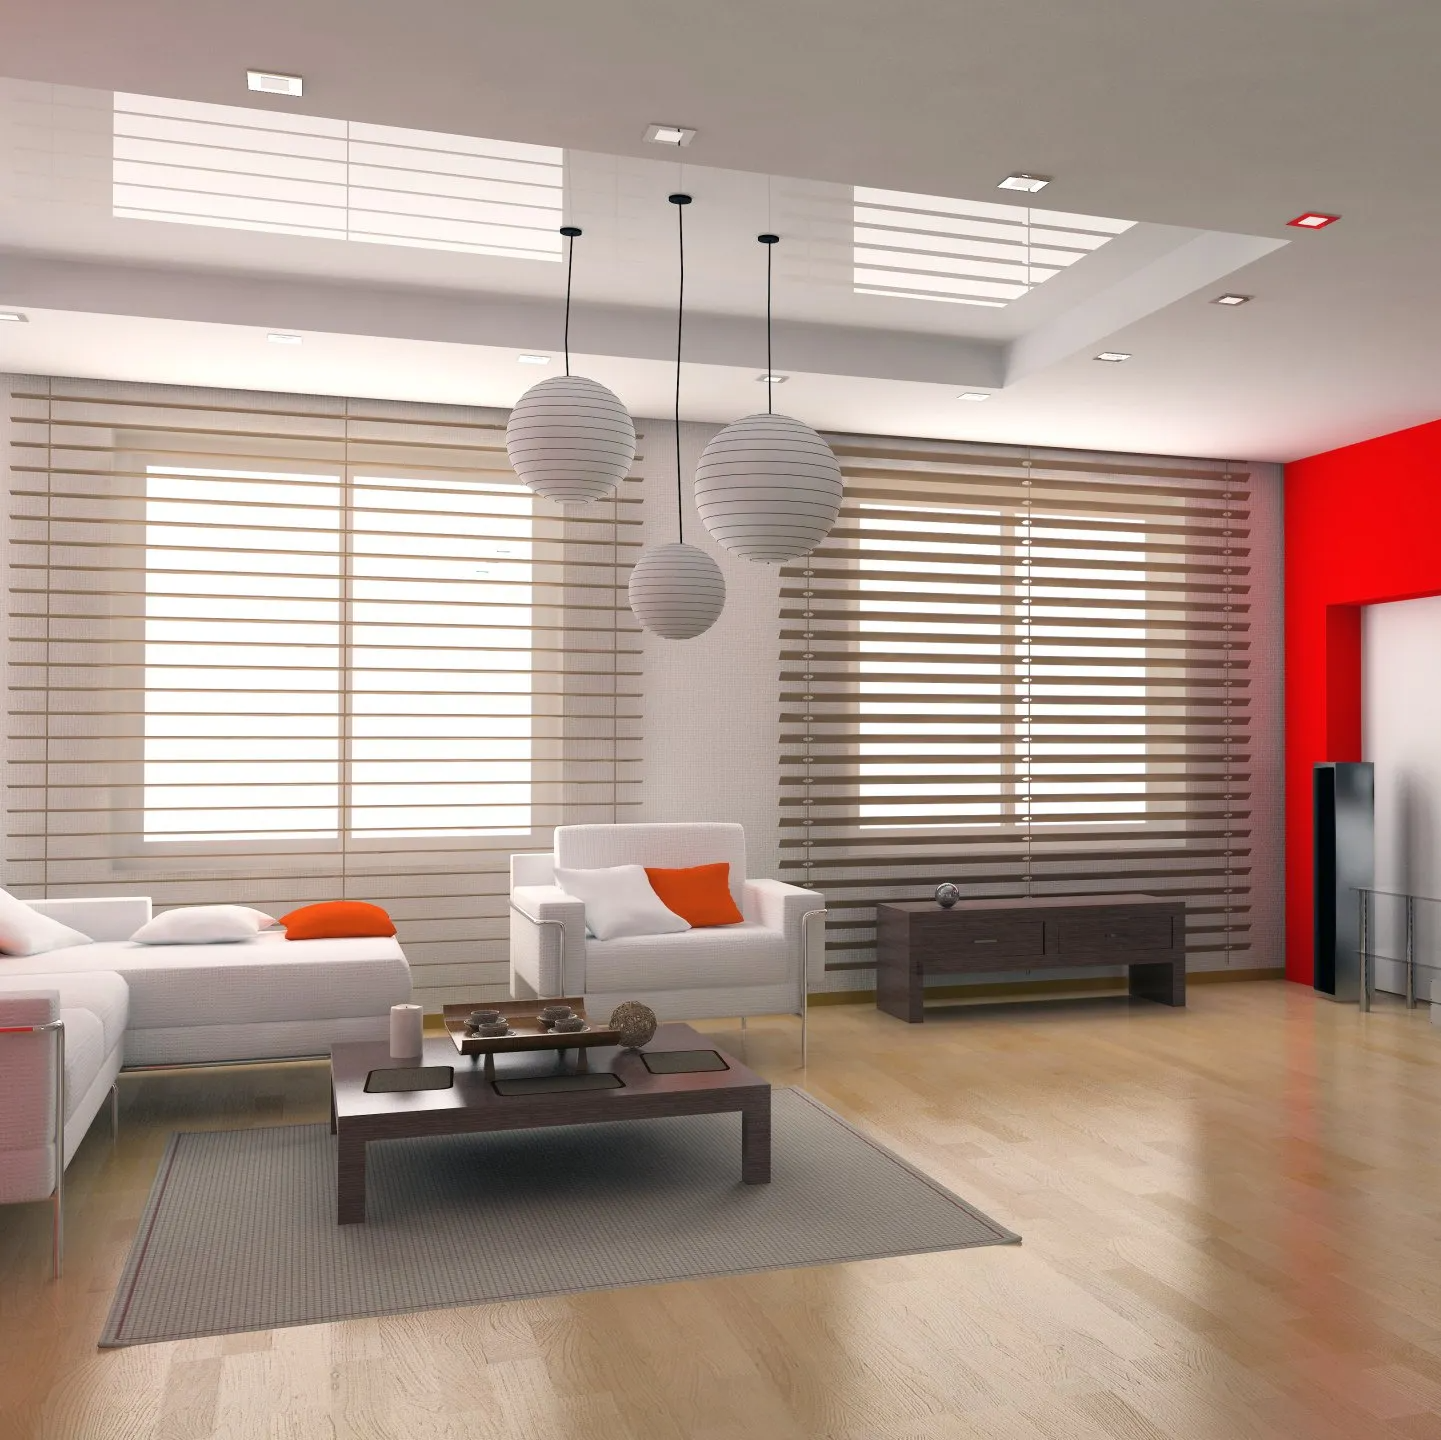 Vivid white couches with red cushions in timber floored loungeroom, with dark timber coffee table on gray rug. Timber wide slat venetian blinds open to let in natural light from outdoors.